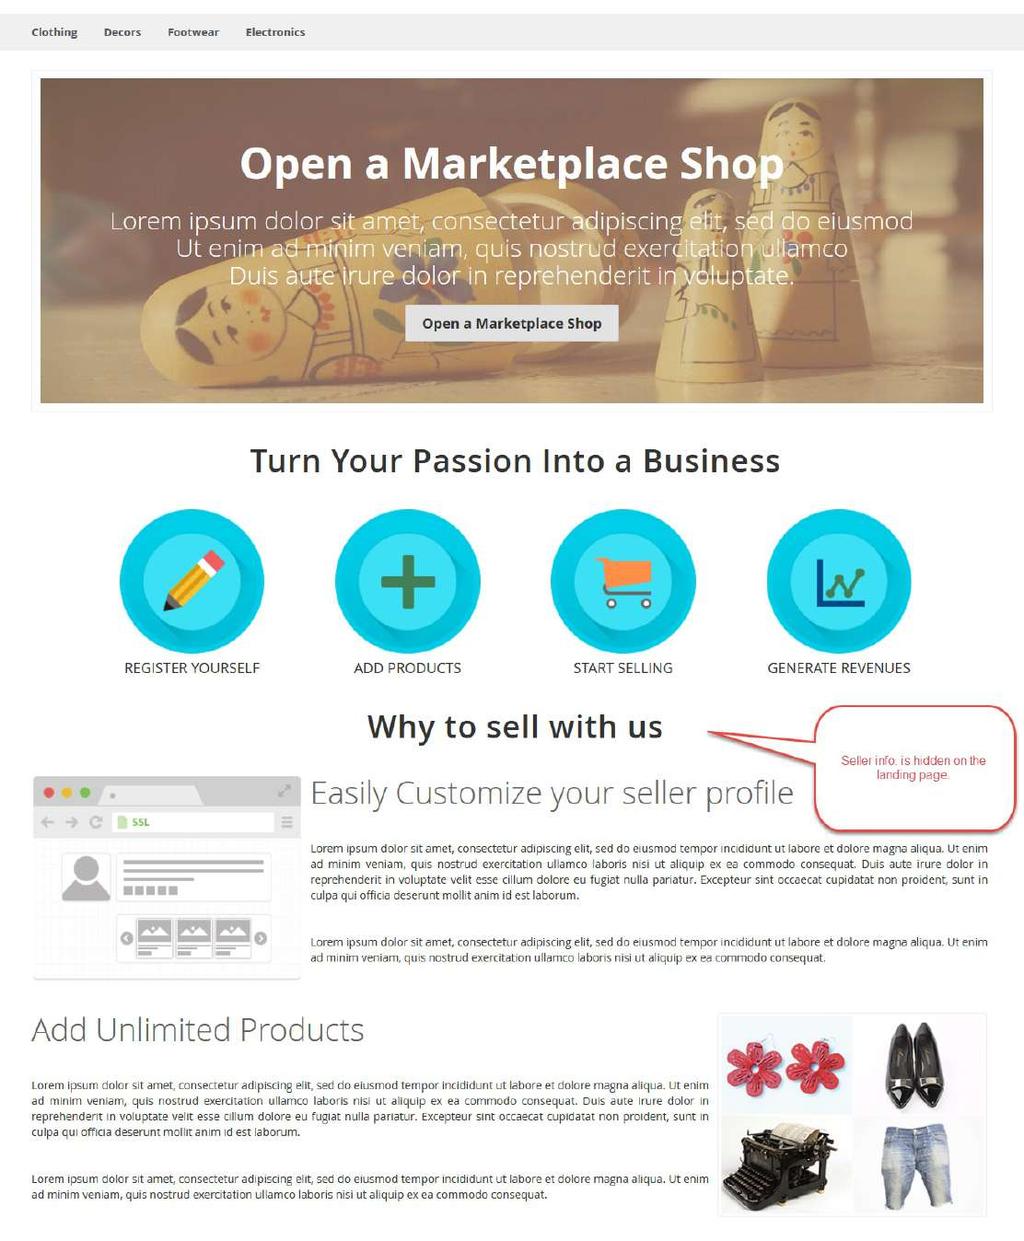 Product Page On the product page, the seller information which is